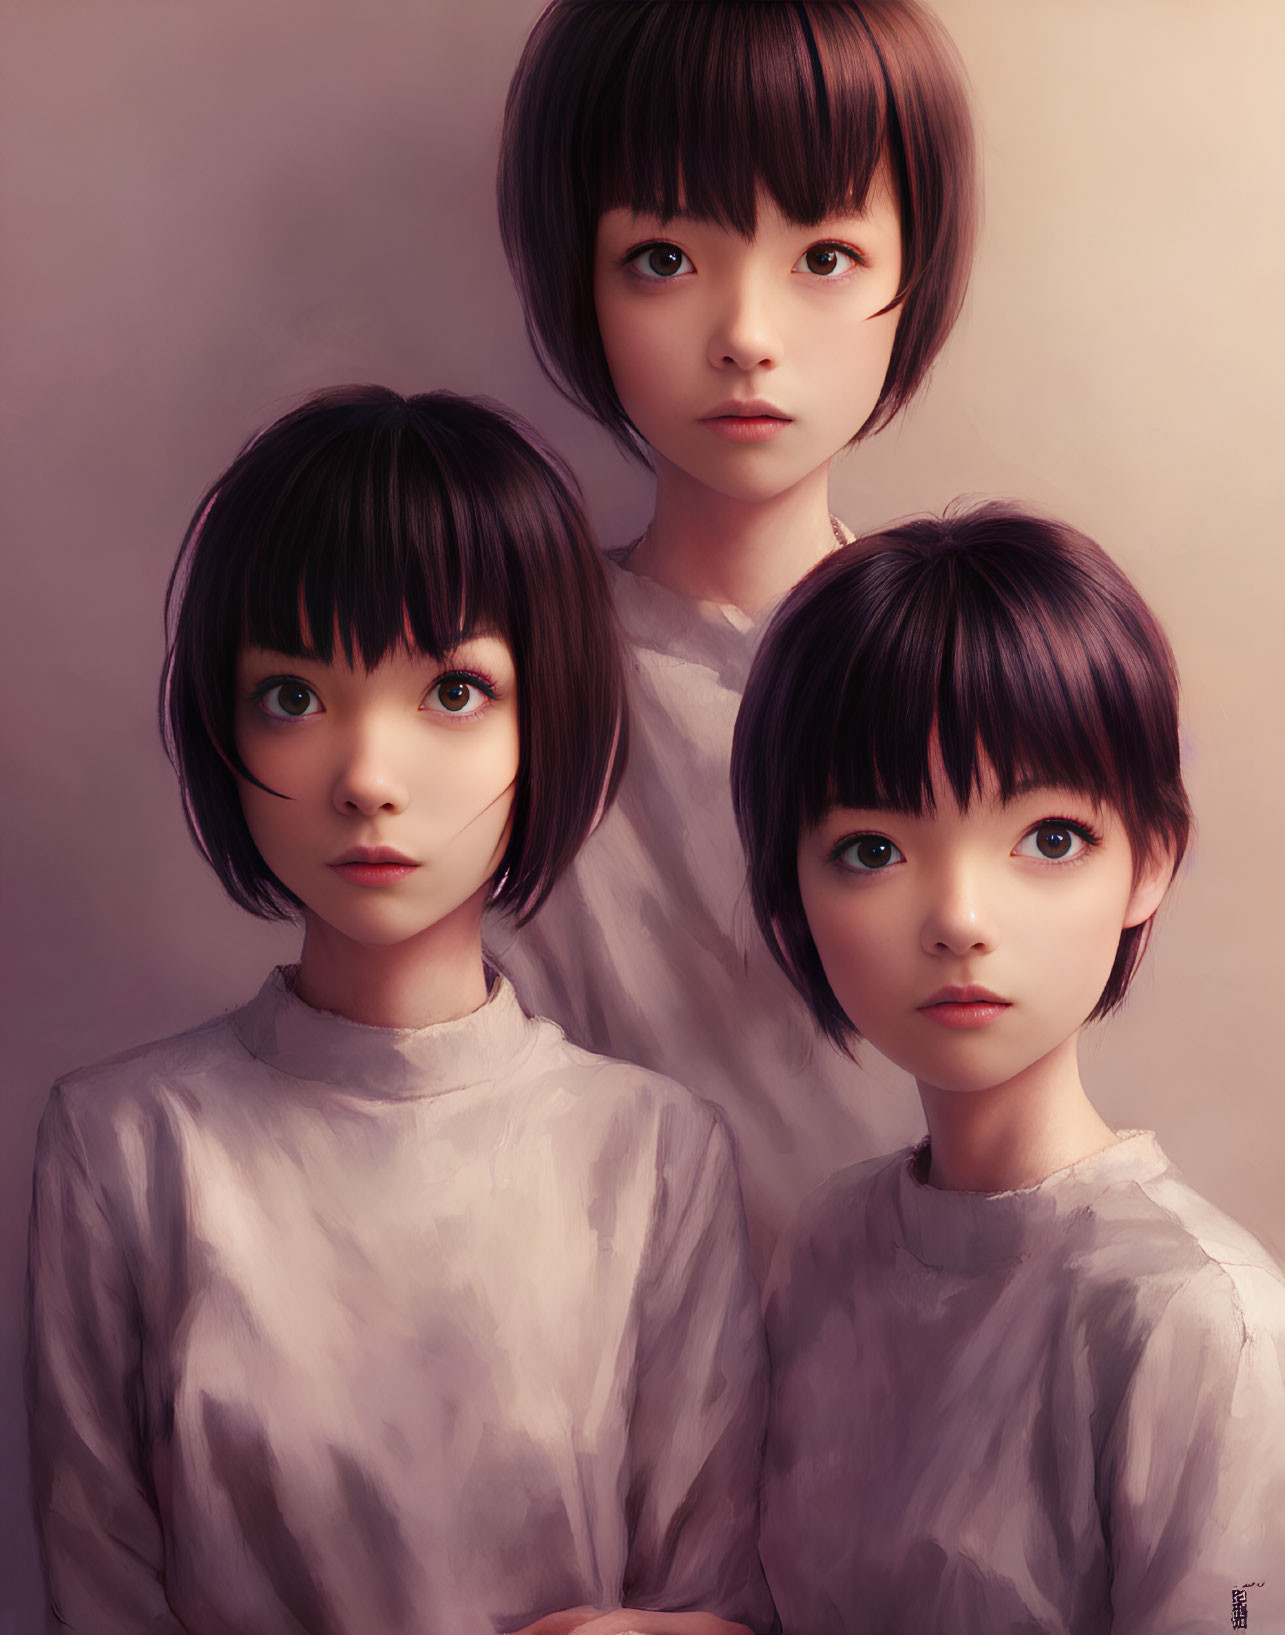 Three stylized girls with bob haircuts and large eyes in different expressions, wearing white tops on a